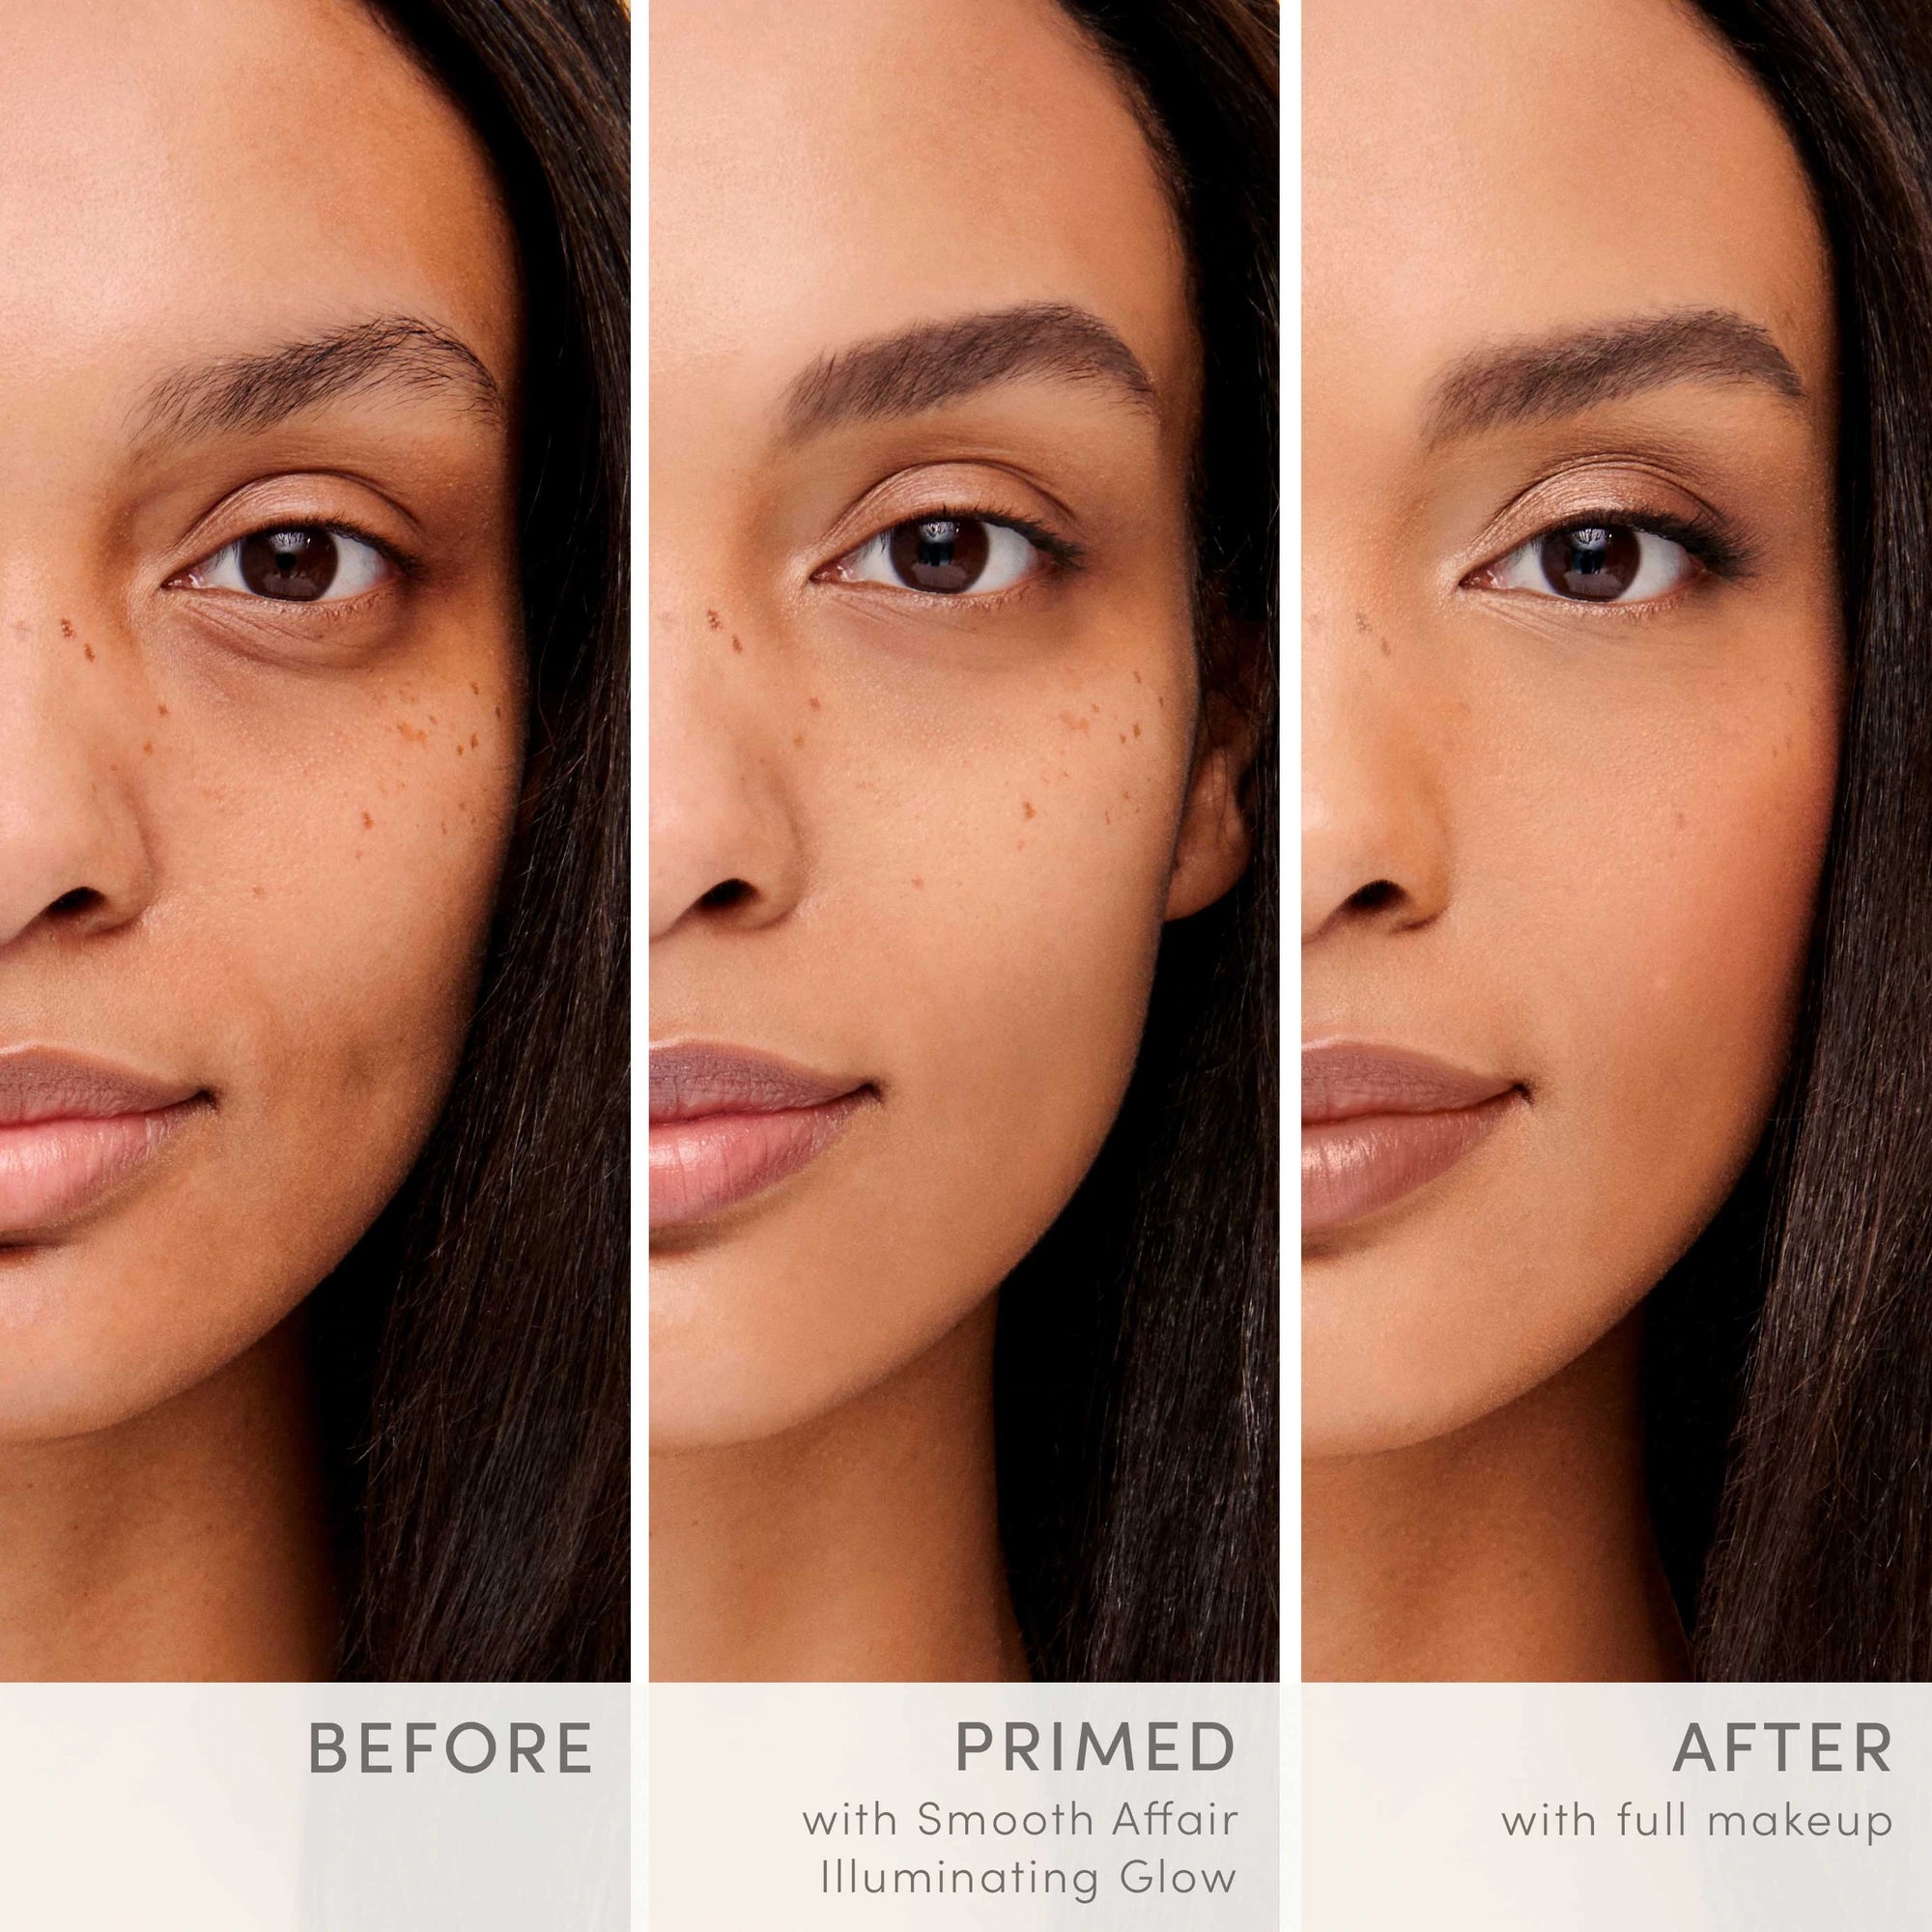 Smooth Affair® Illuminating Glow Face Primer before, primed and after shot